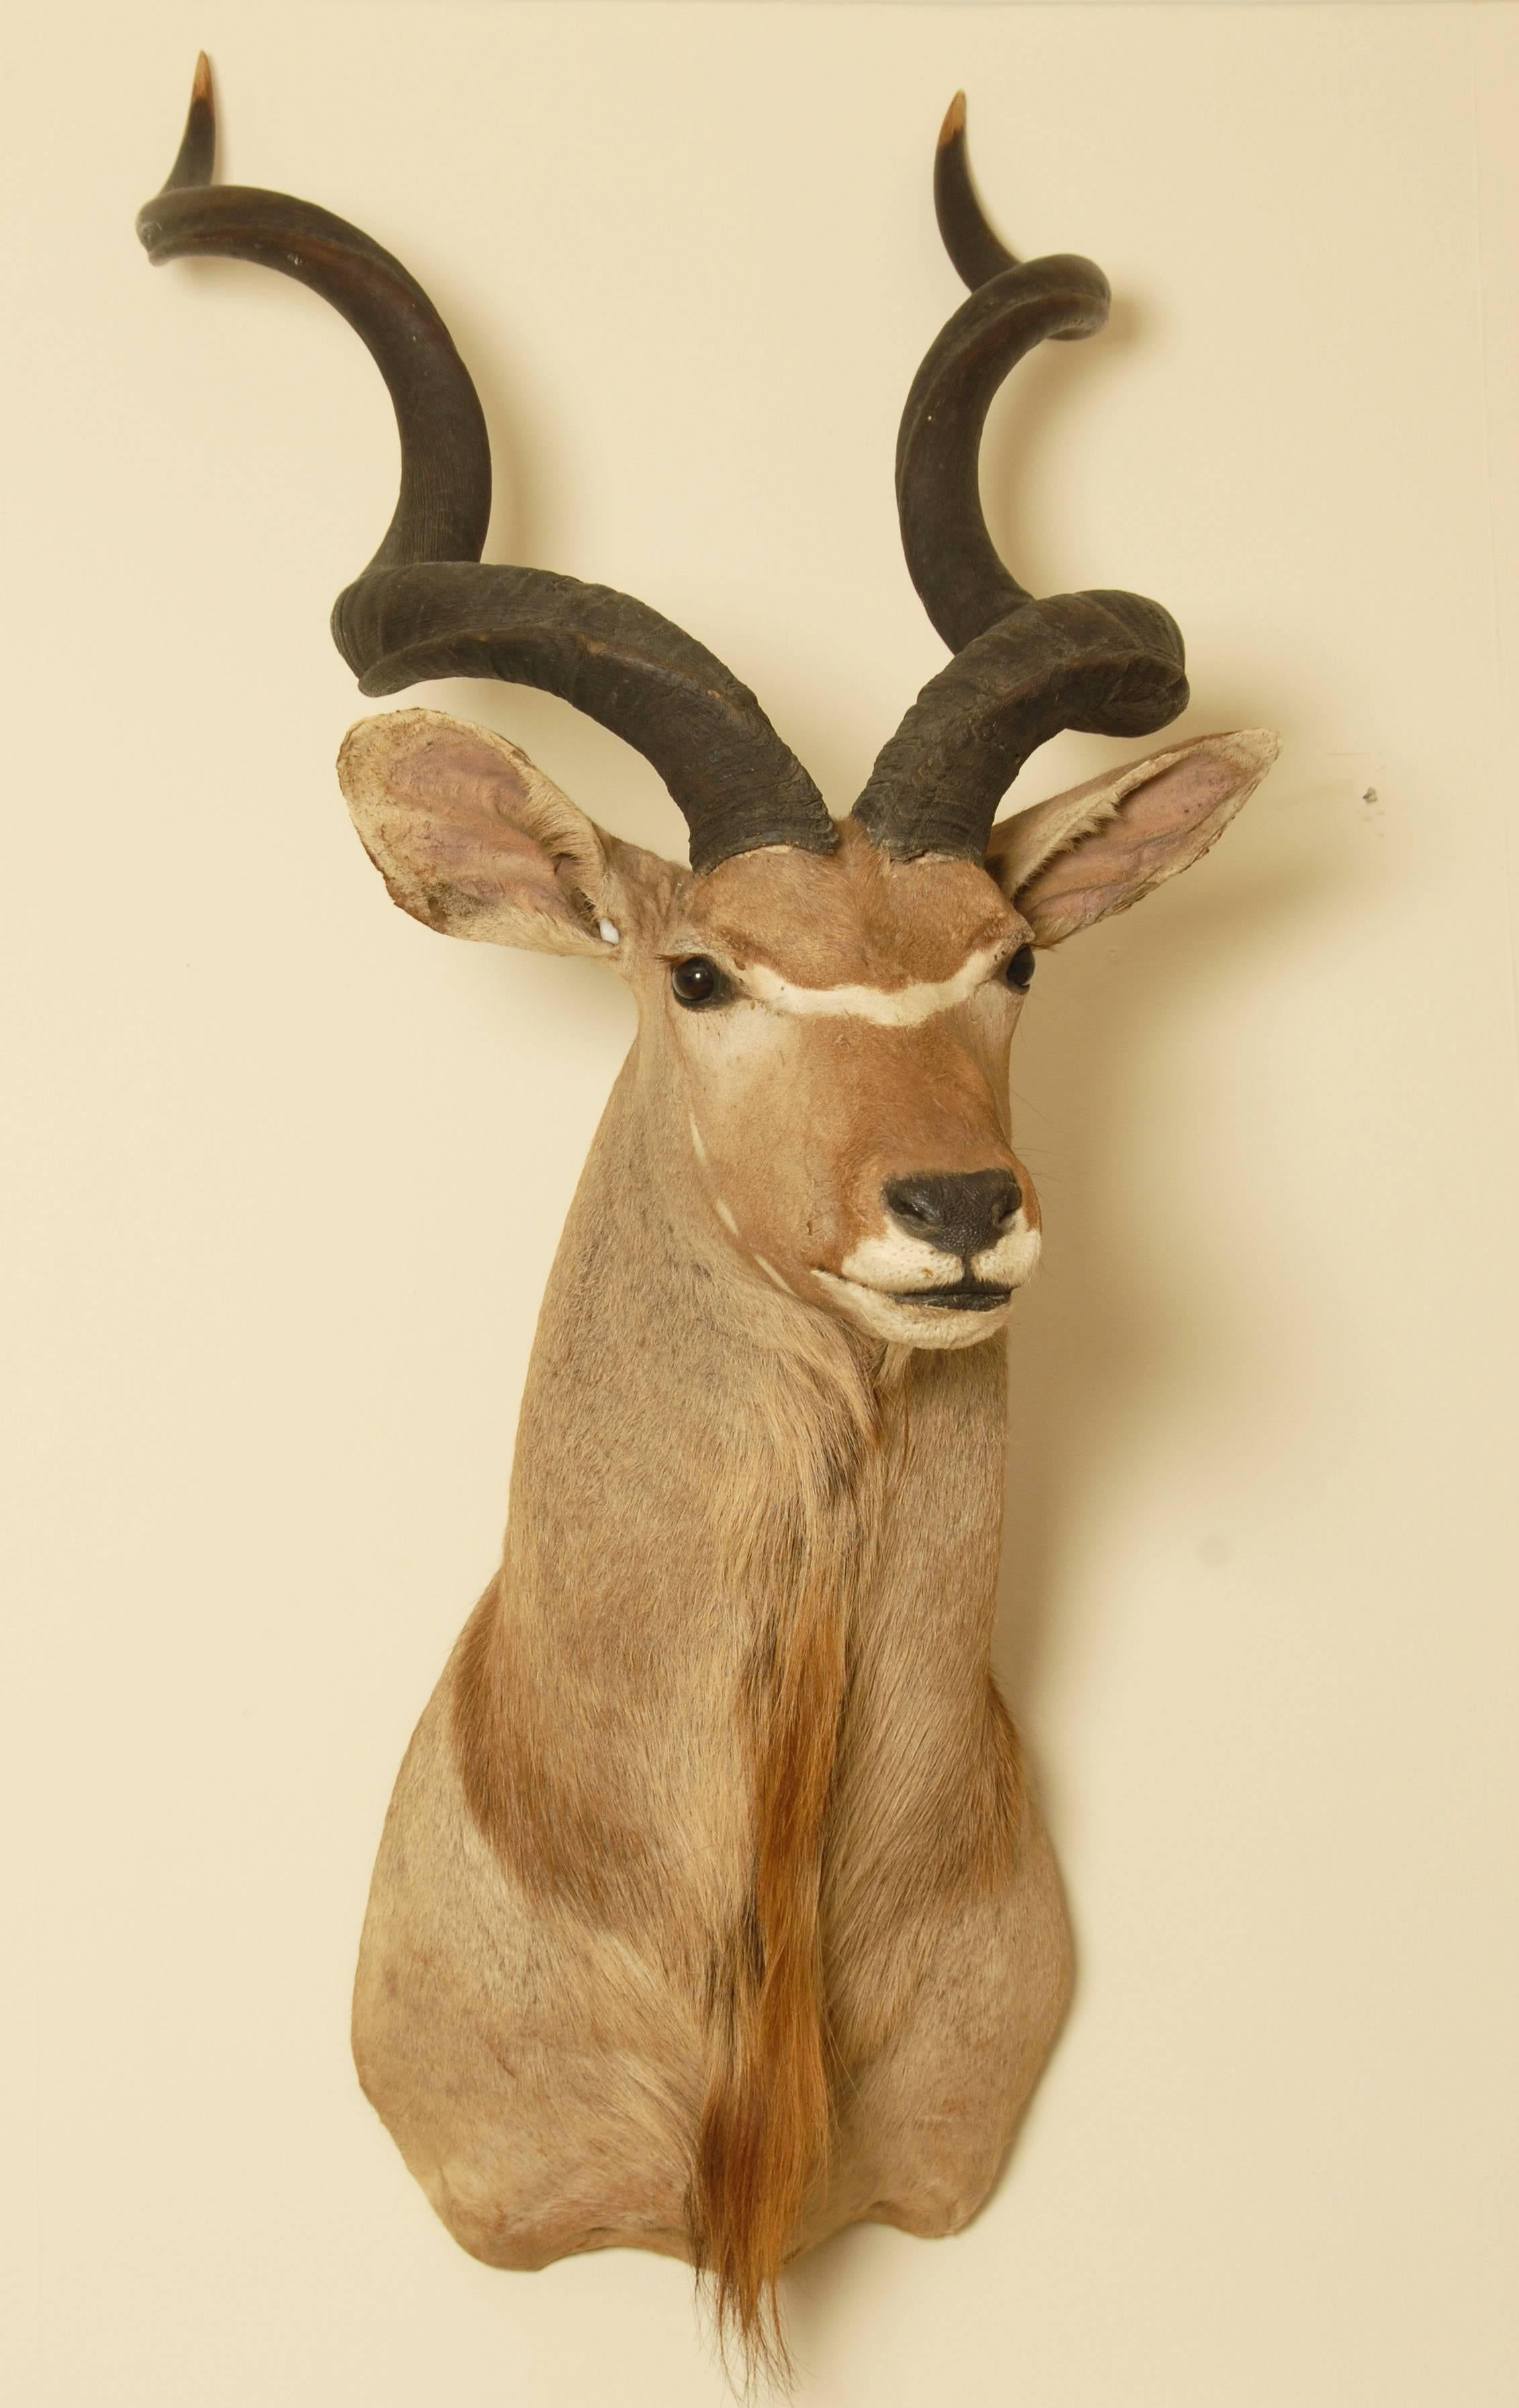 Huge and impressive African Greater Kudu taxidermy head and shoulder mount.
Early 20th century, the taxidermy work is excellent.
This will hang from any wall with one carefully anchored heavy duty screw fixing.